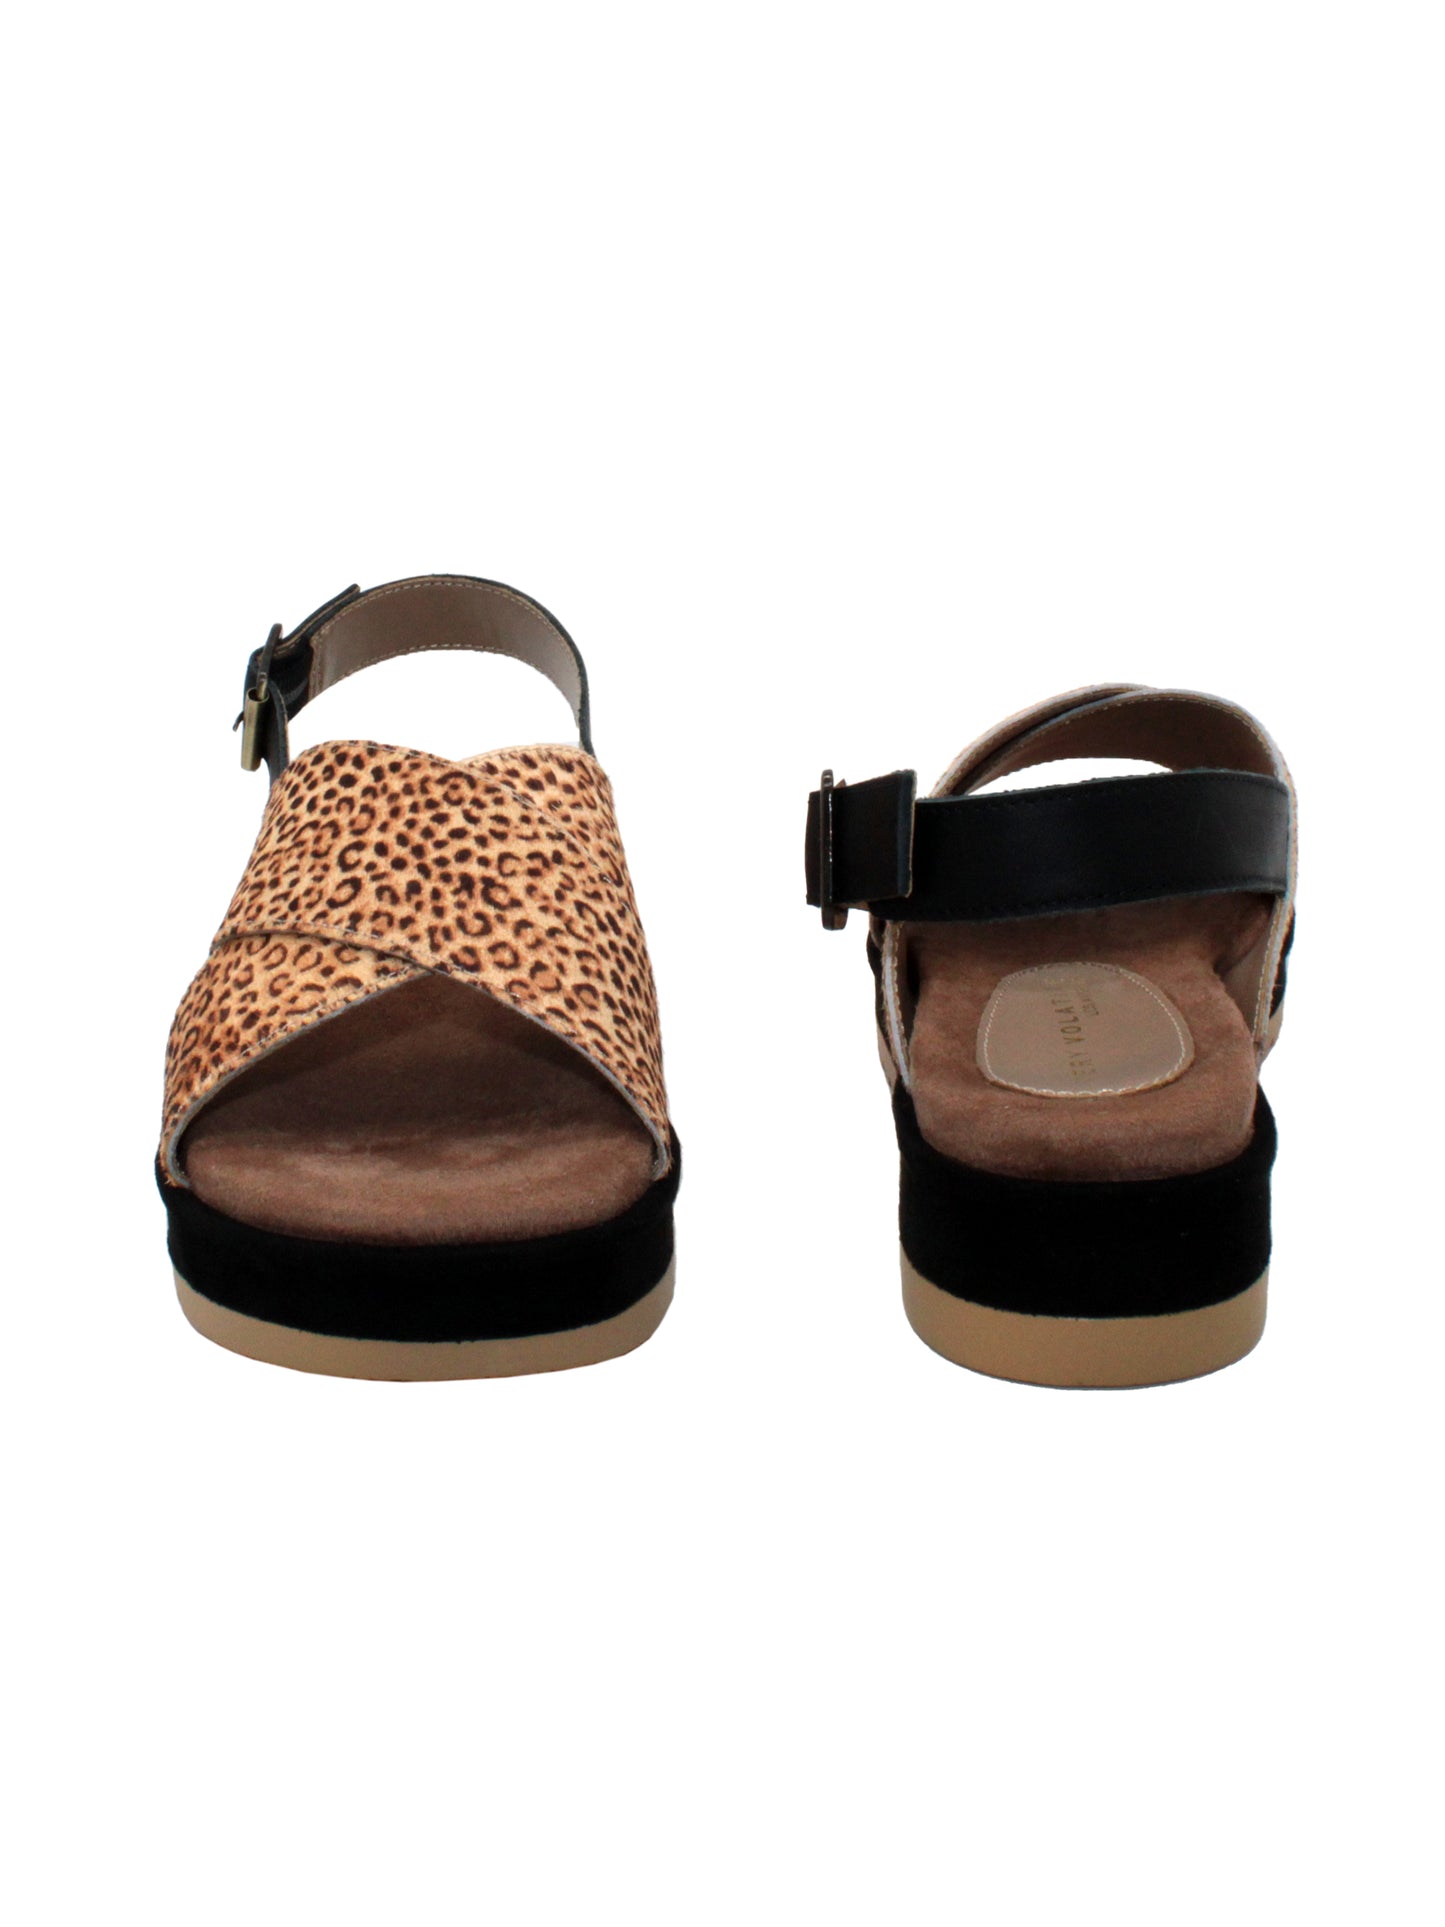 Calabar is Very Volatile’s crisscross sandal with adjustable sling comes to life in genuine animal printed calf hair. Featuring a cushioned footbed for all day wear. Pair this with jeans or your favorite dress for elevated comfort and style tan leopard